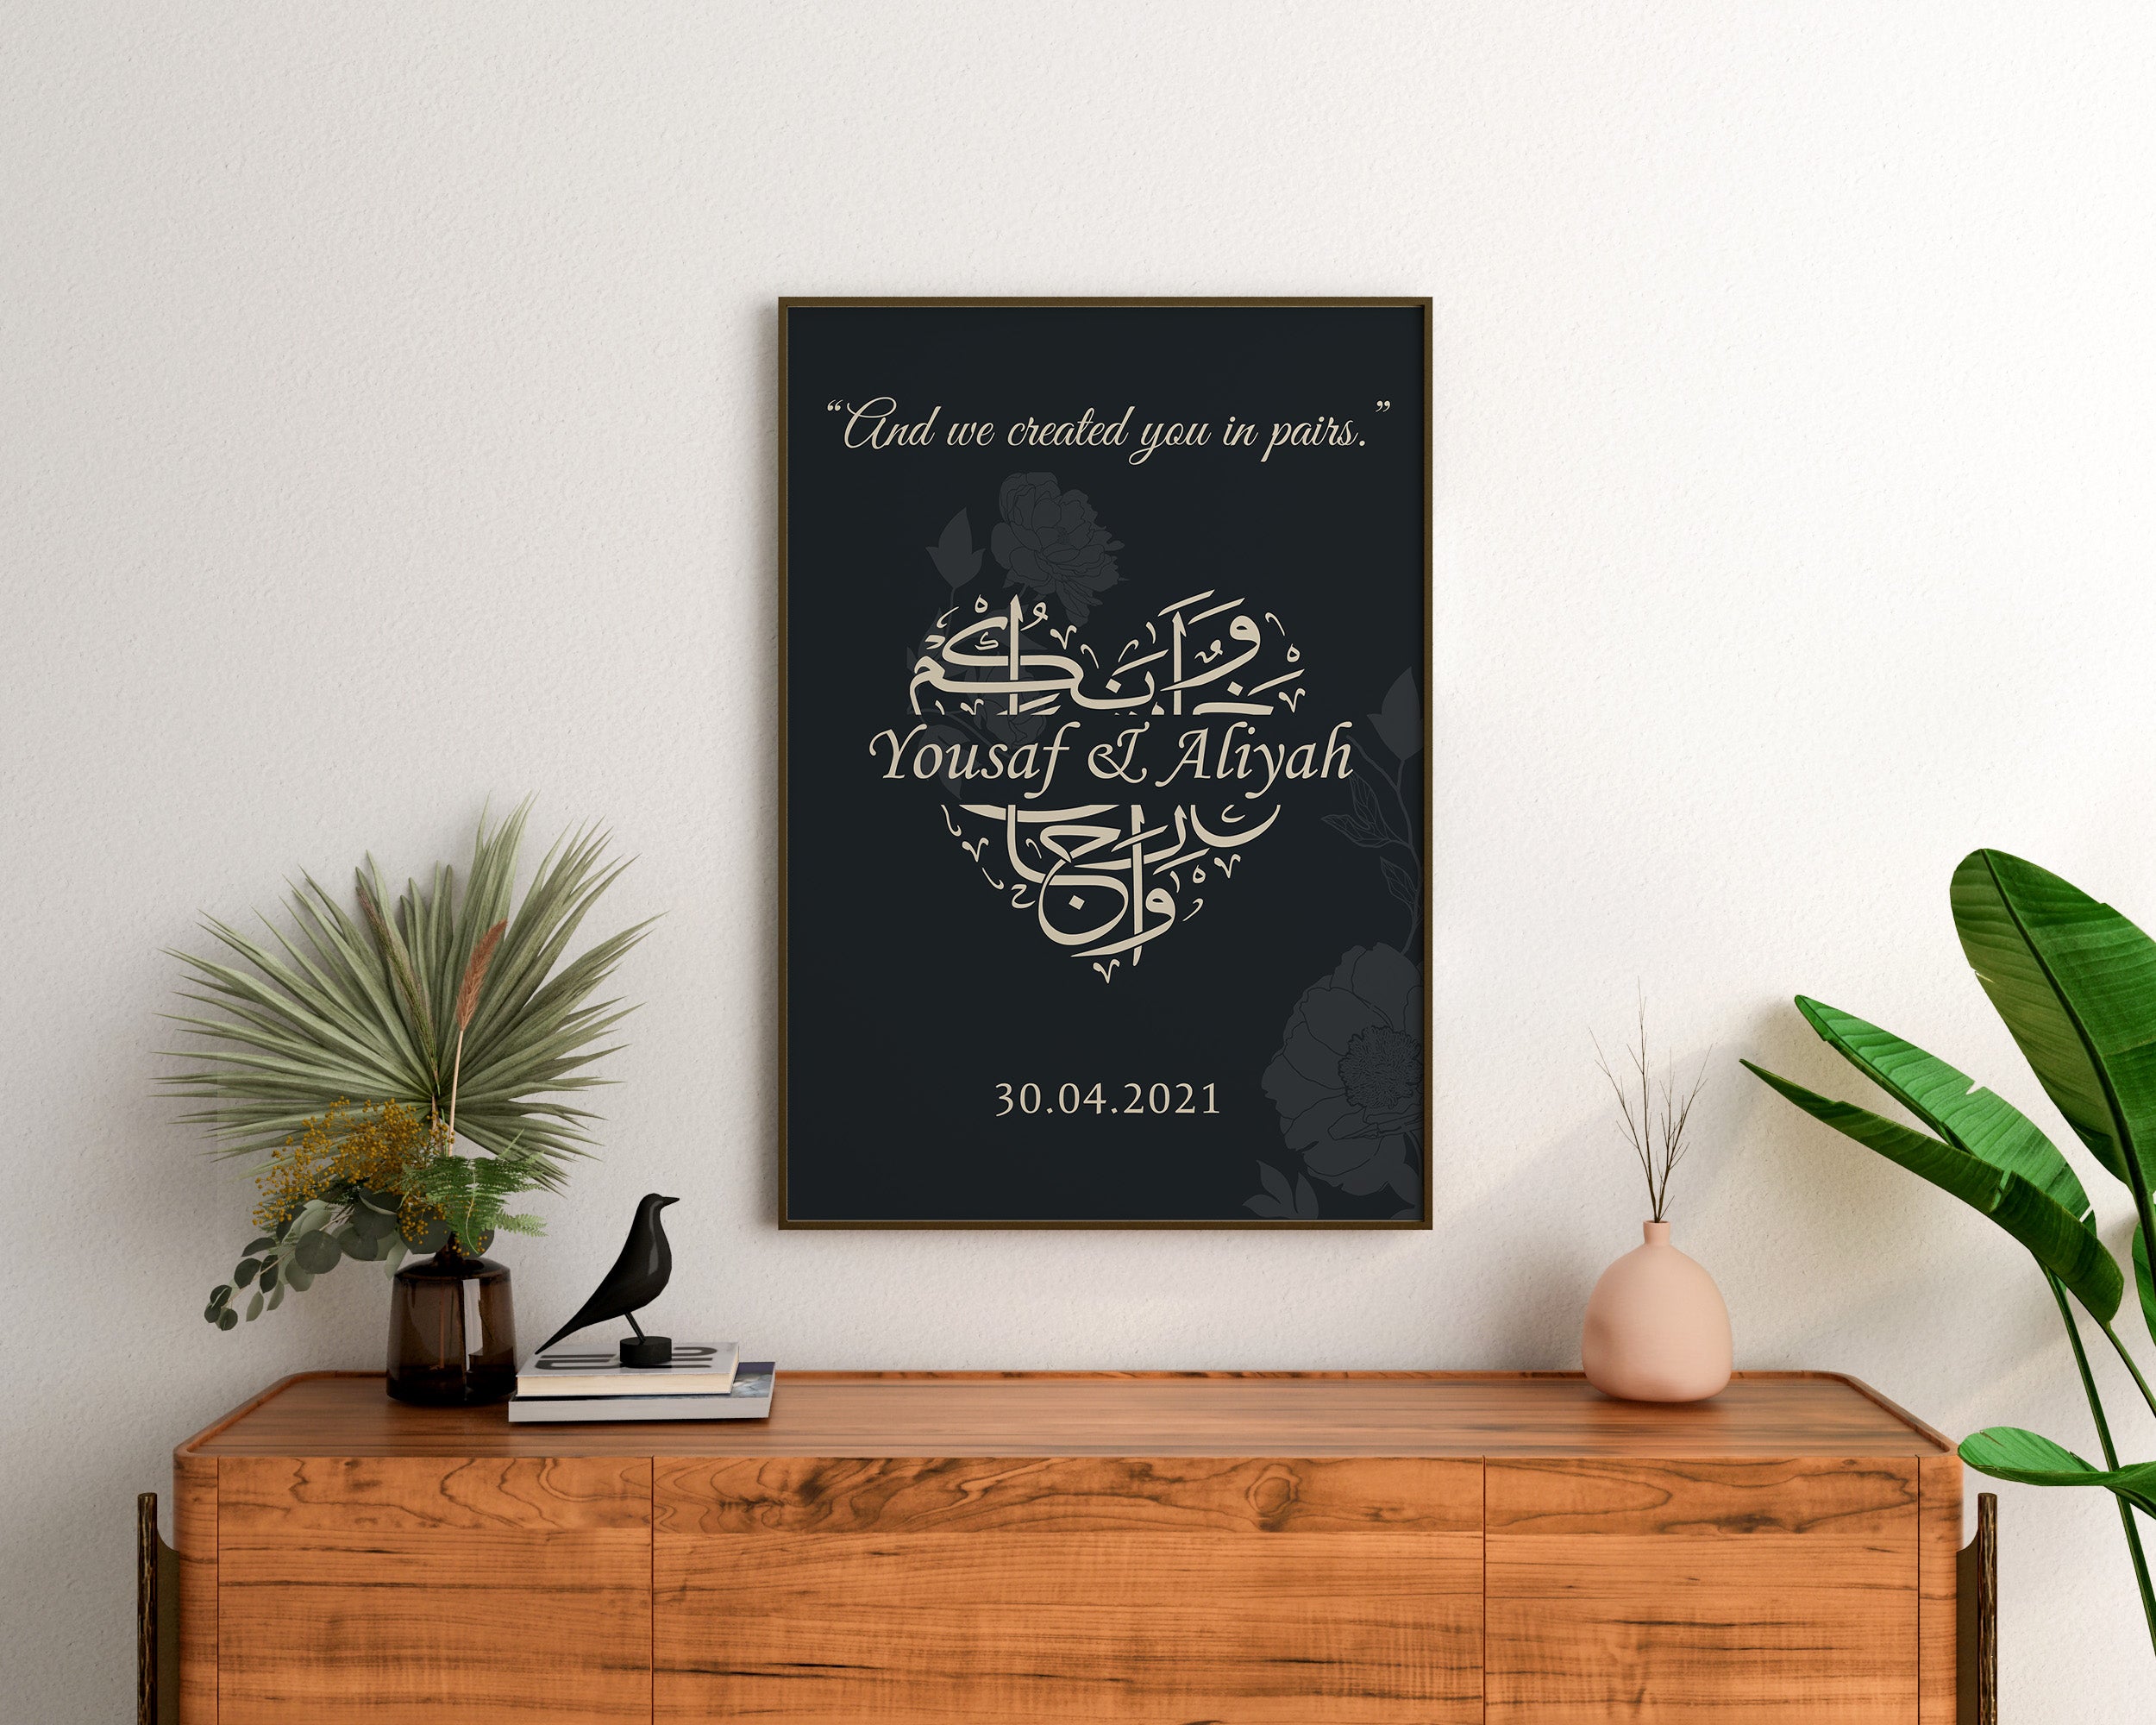 "And we created you in pairs." Personalised Nikkah Gift New Couple Gift Anniversary Islamic Wall Print - Peaceful Arts ltd